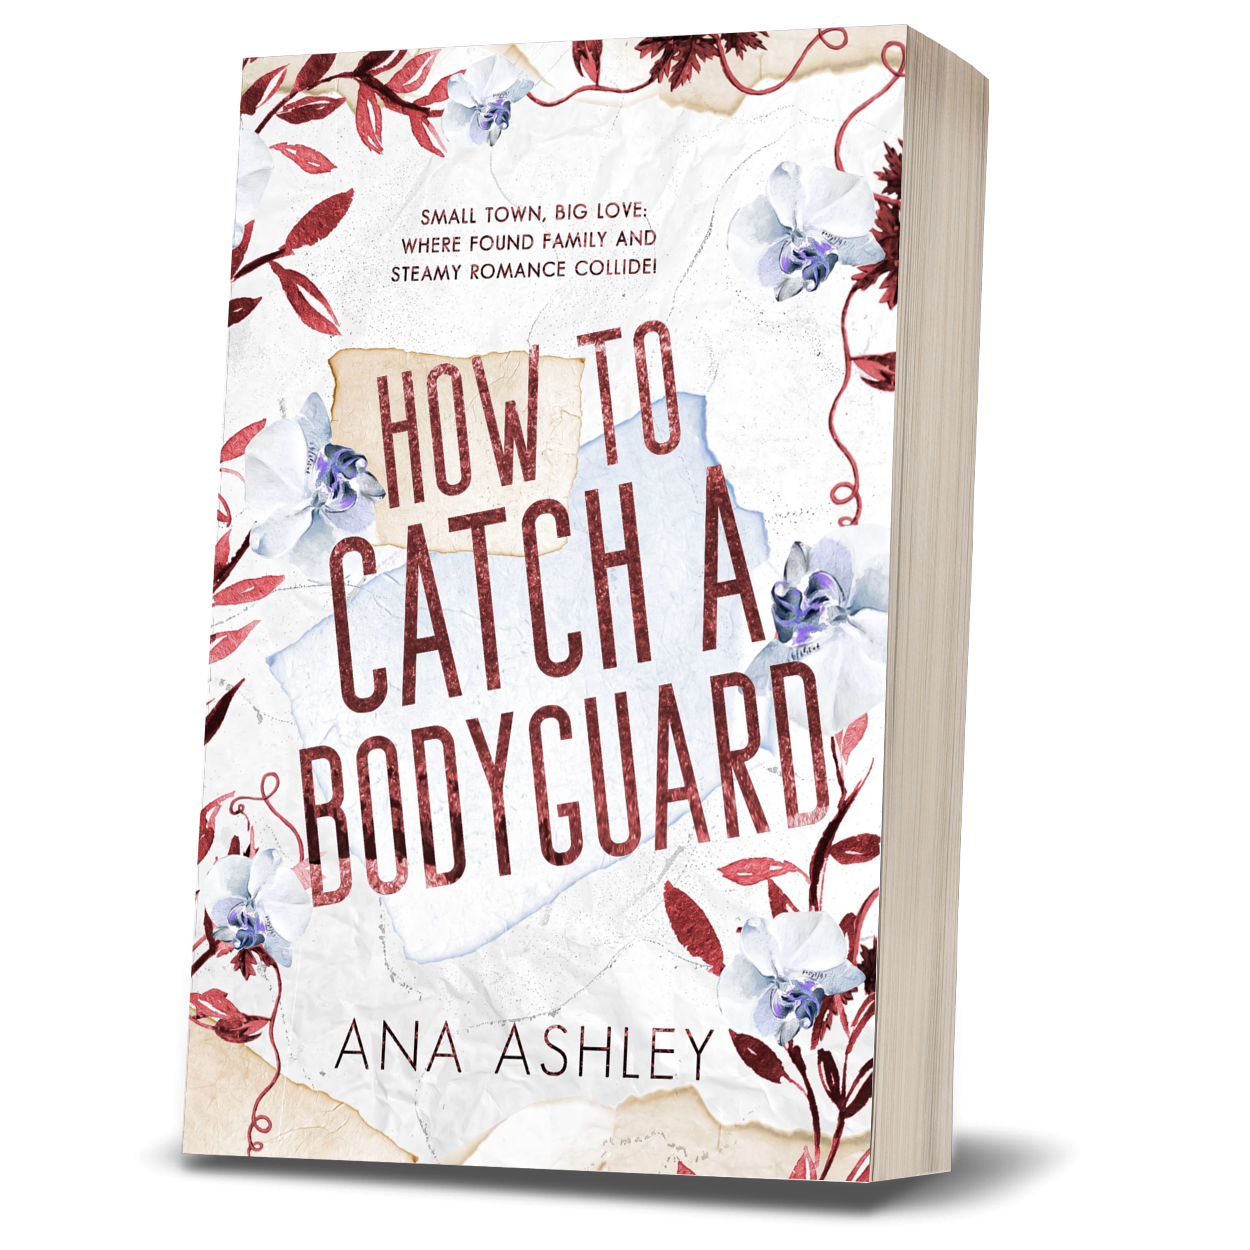 How To Catch A Bodyguard - Chester Falls Series Book 3 (Special Edition Paperback)